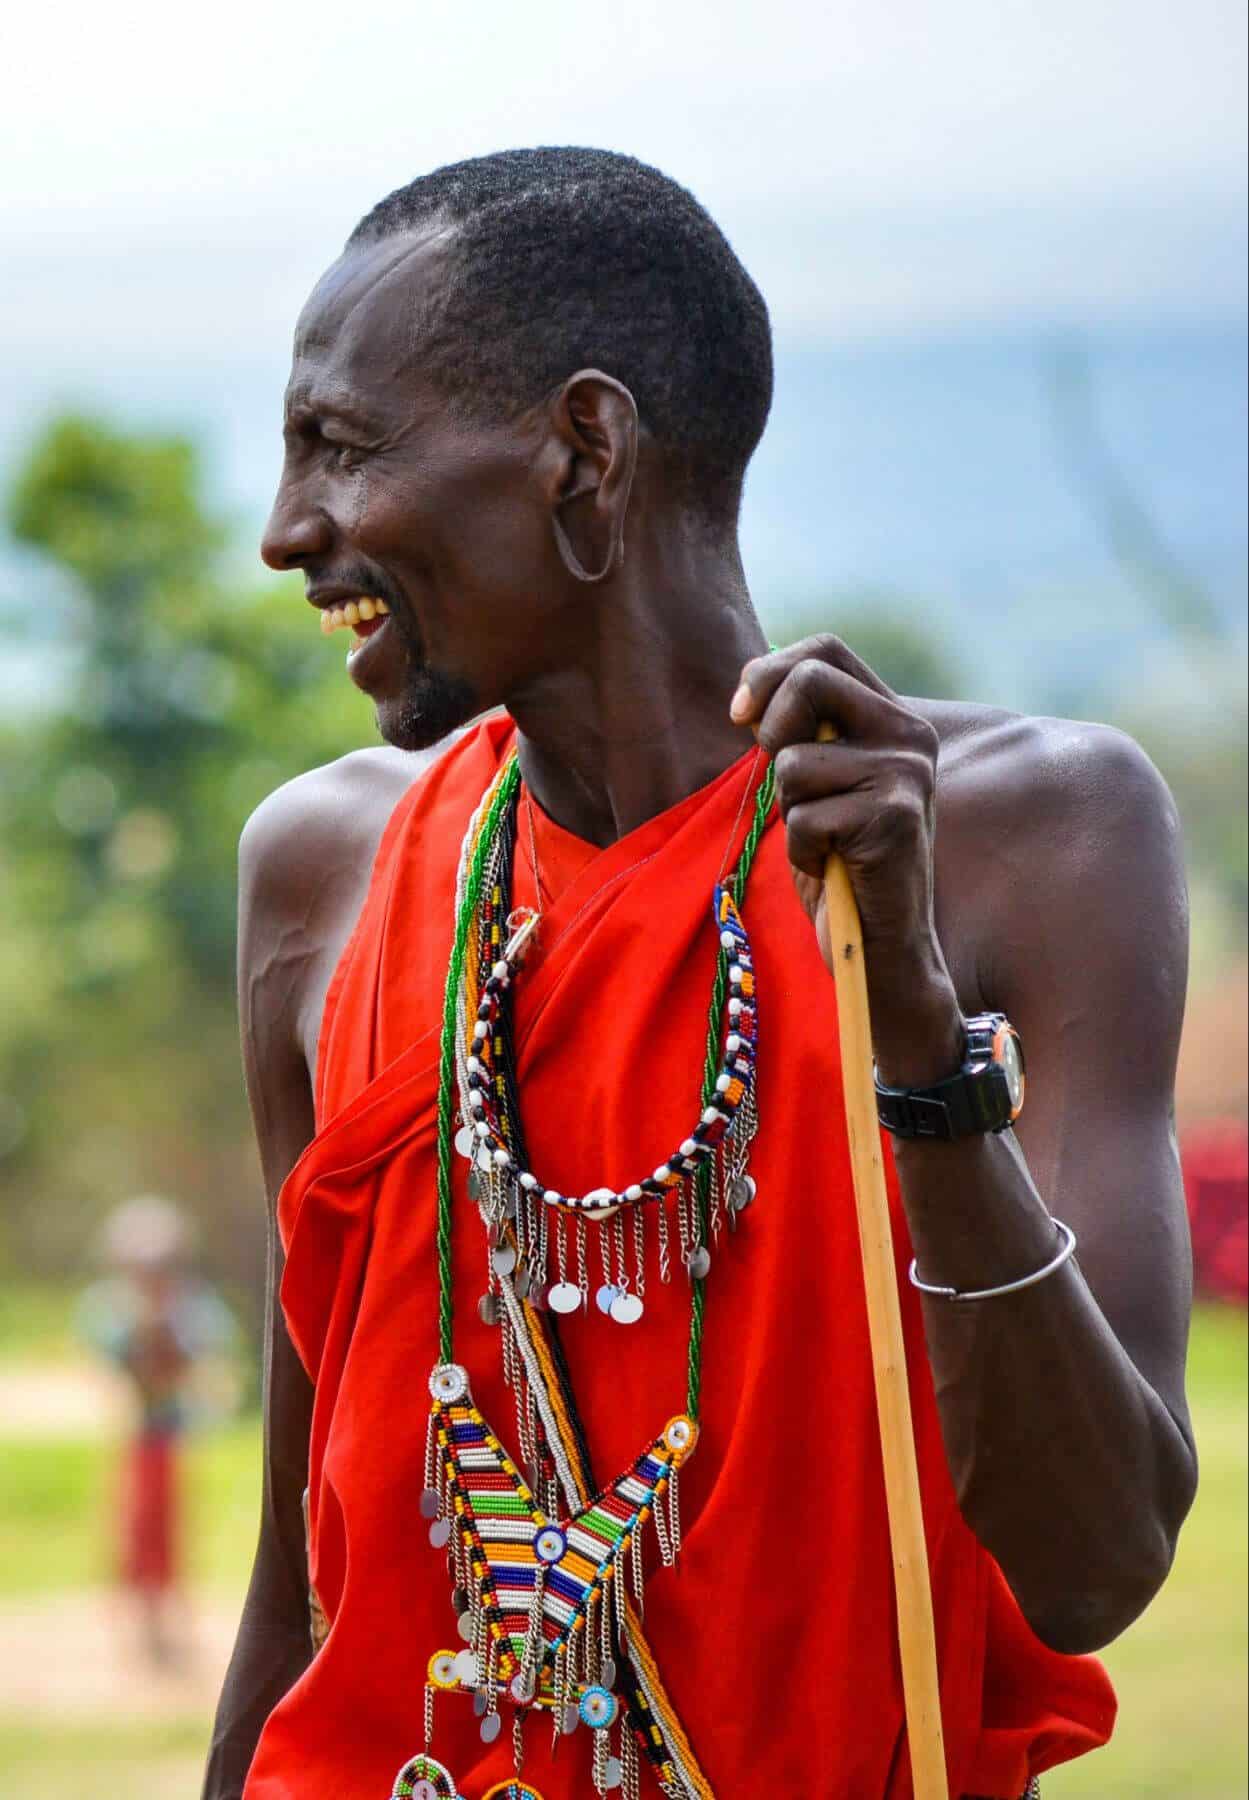 A man in a traditionnal dress smilling